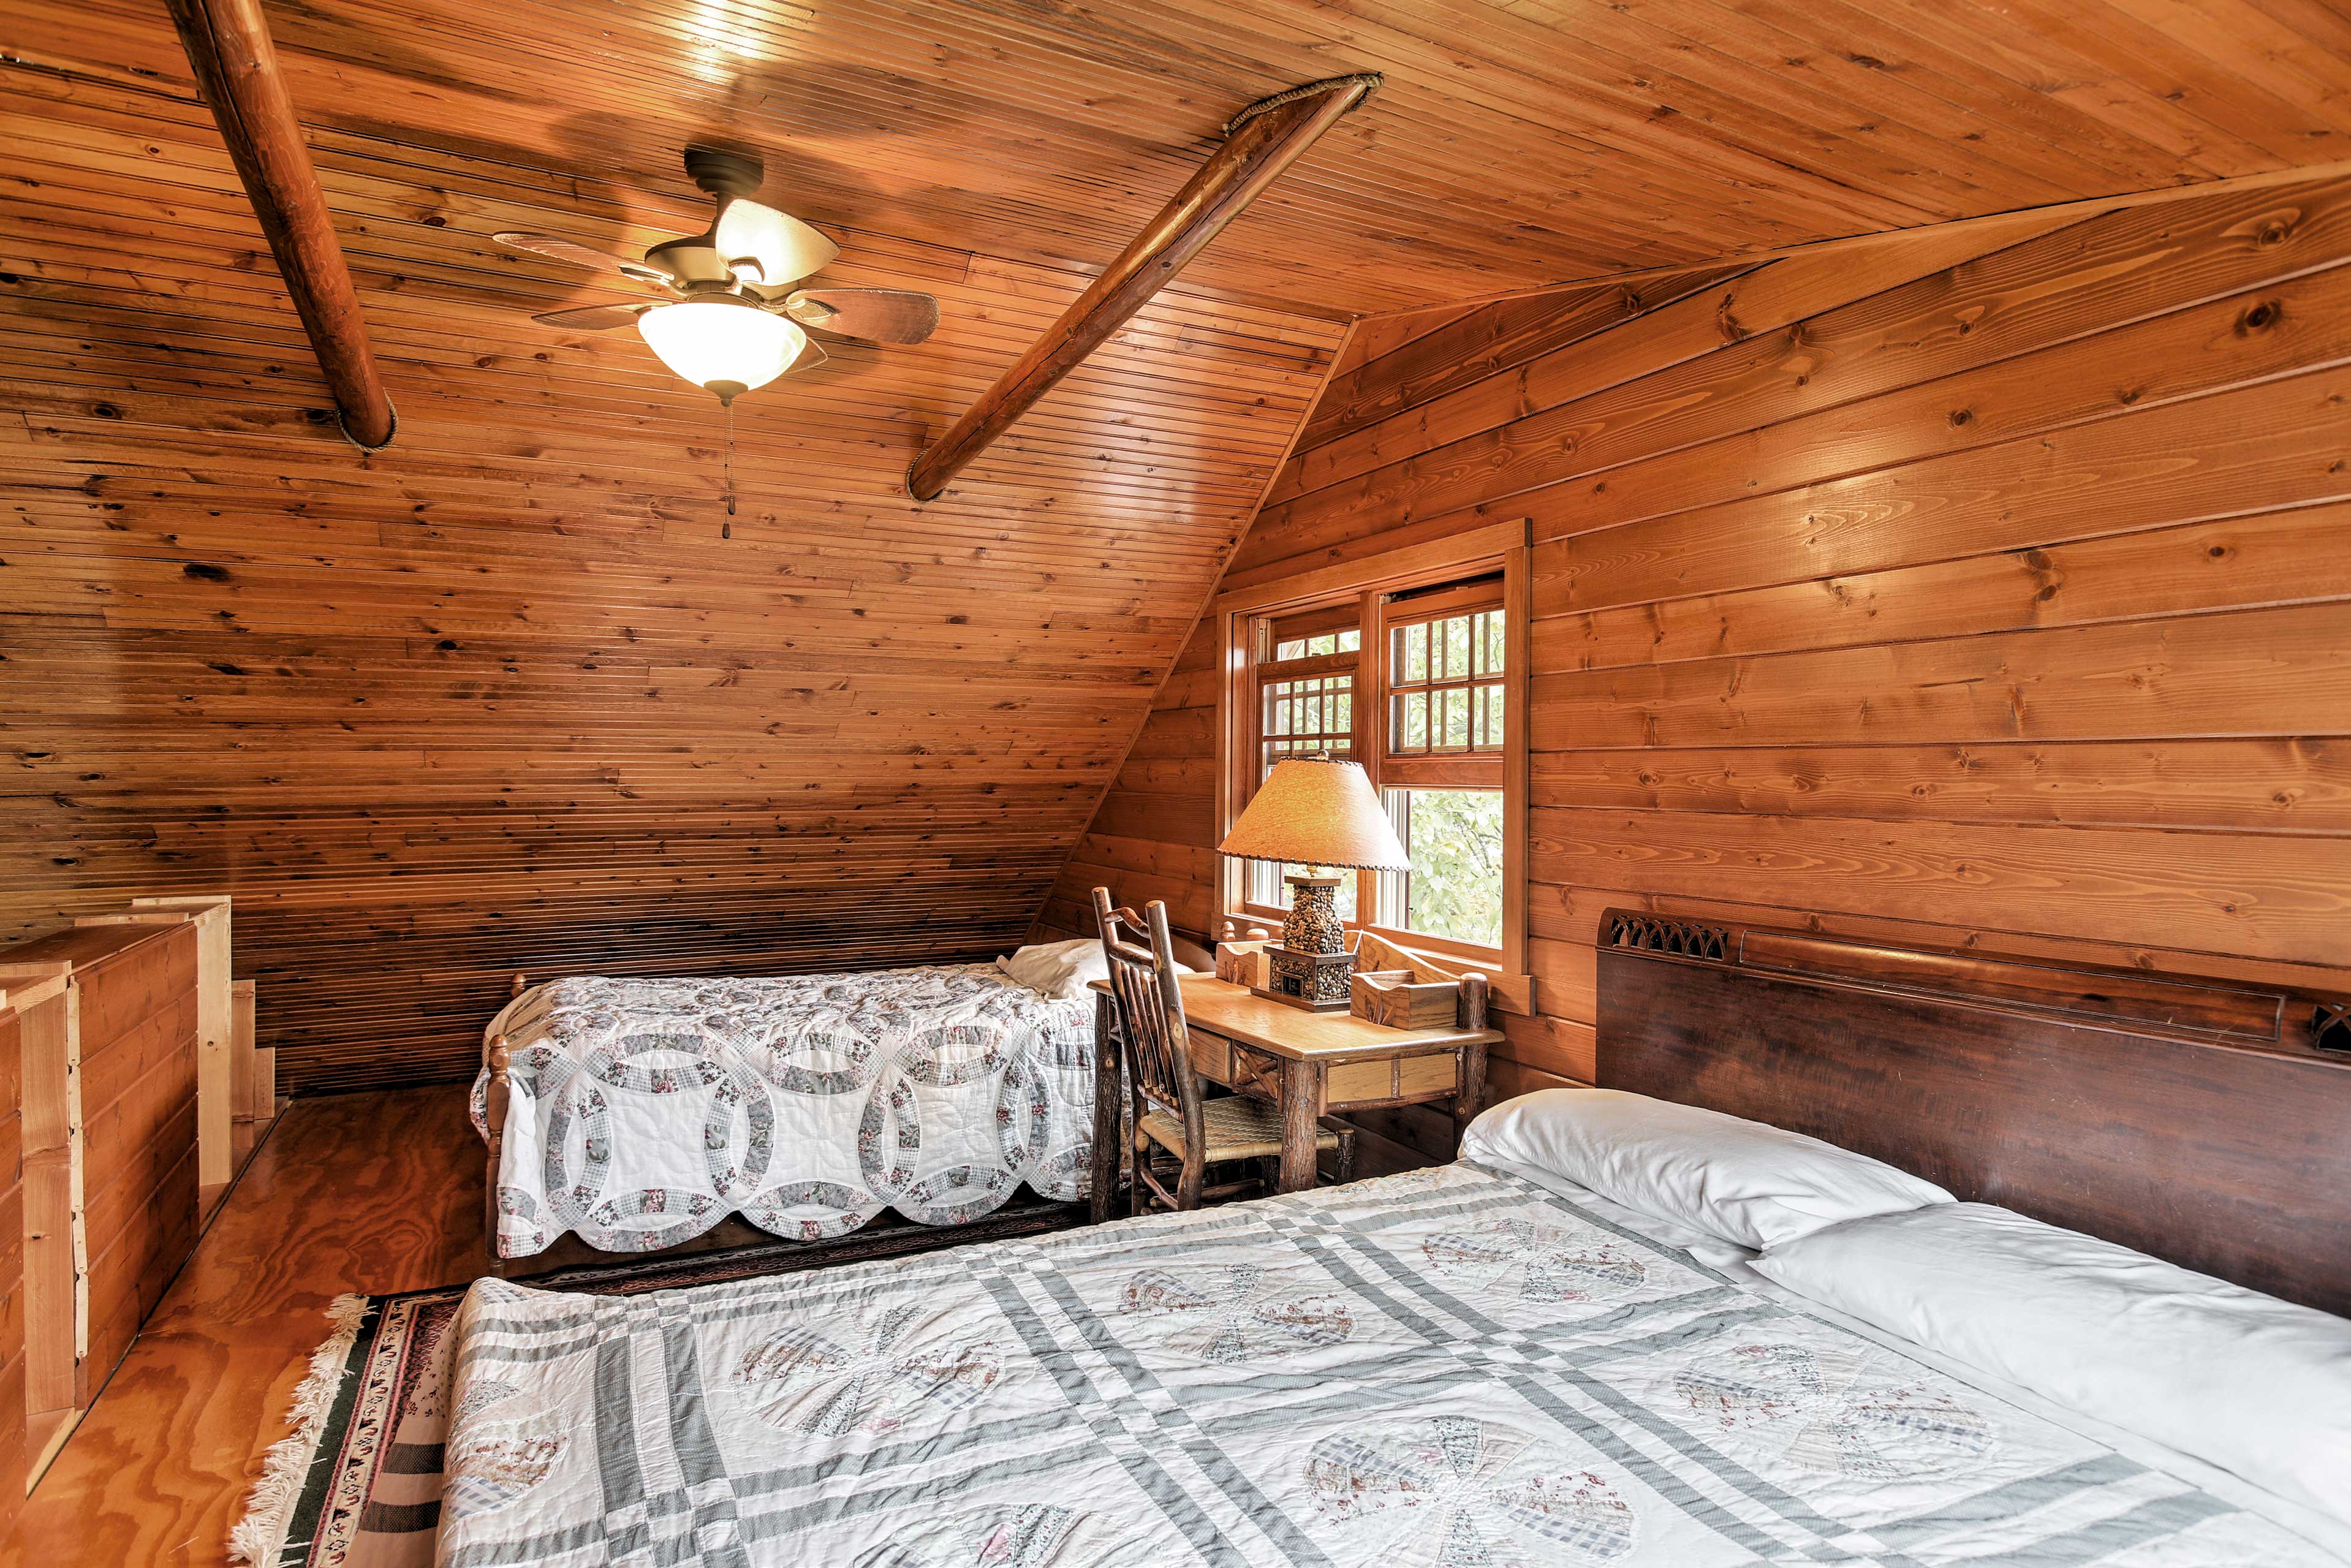 Sleep in the full bed or the queen bed in the South Side loft.